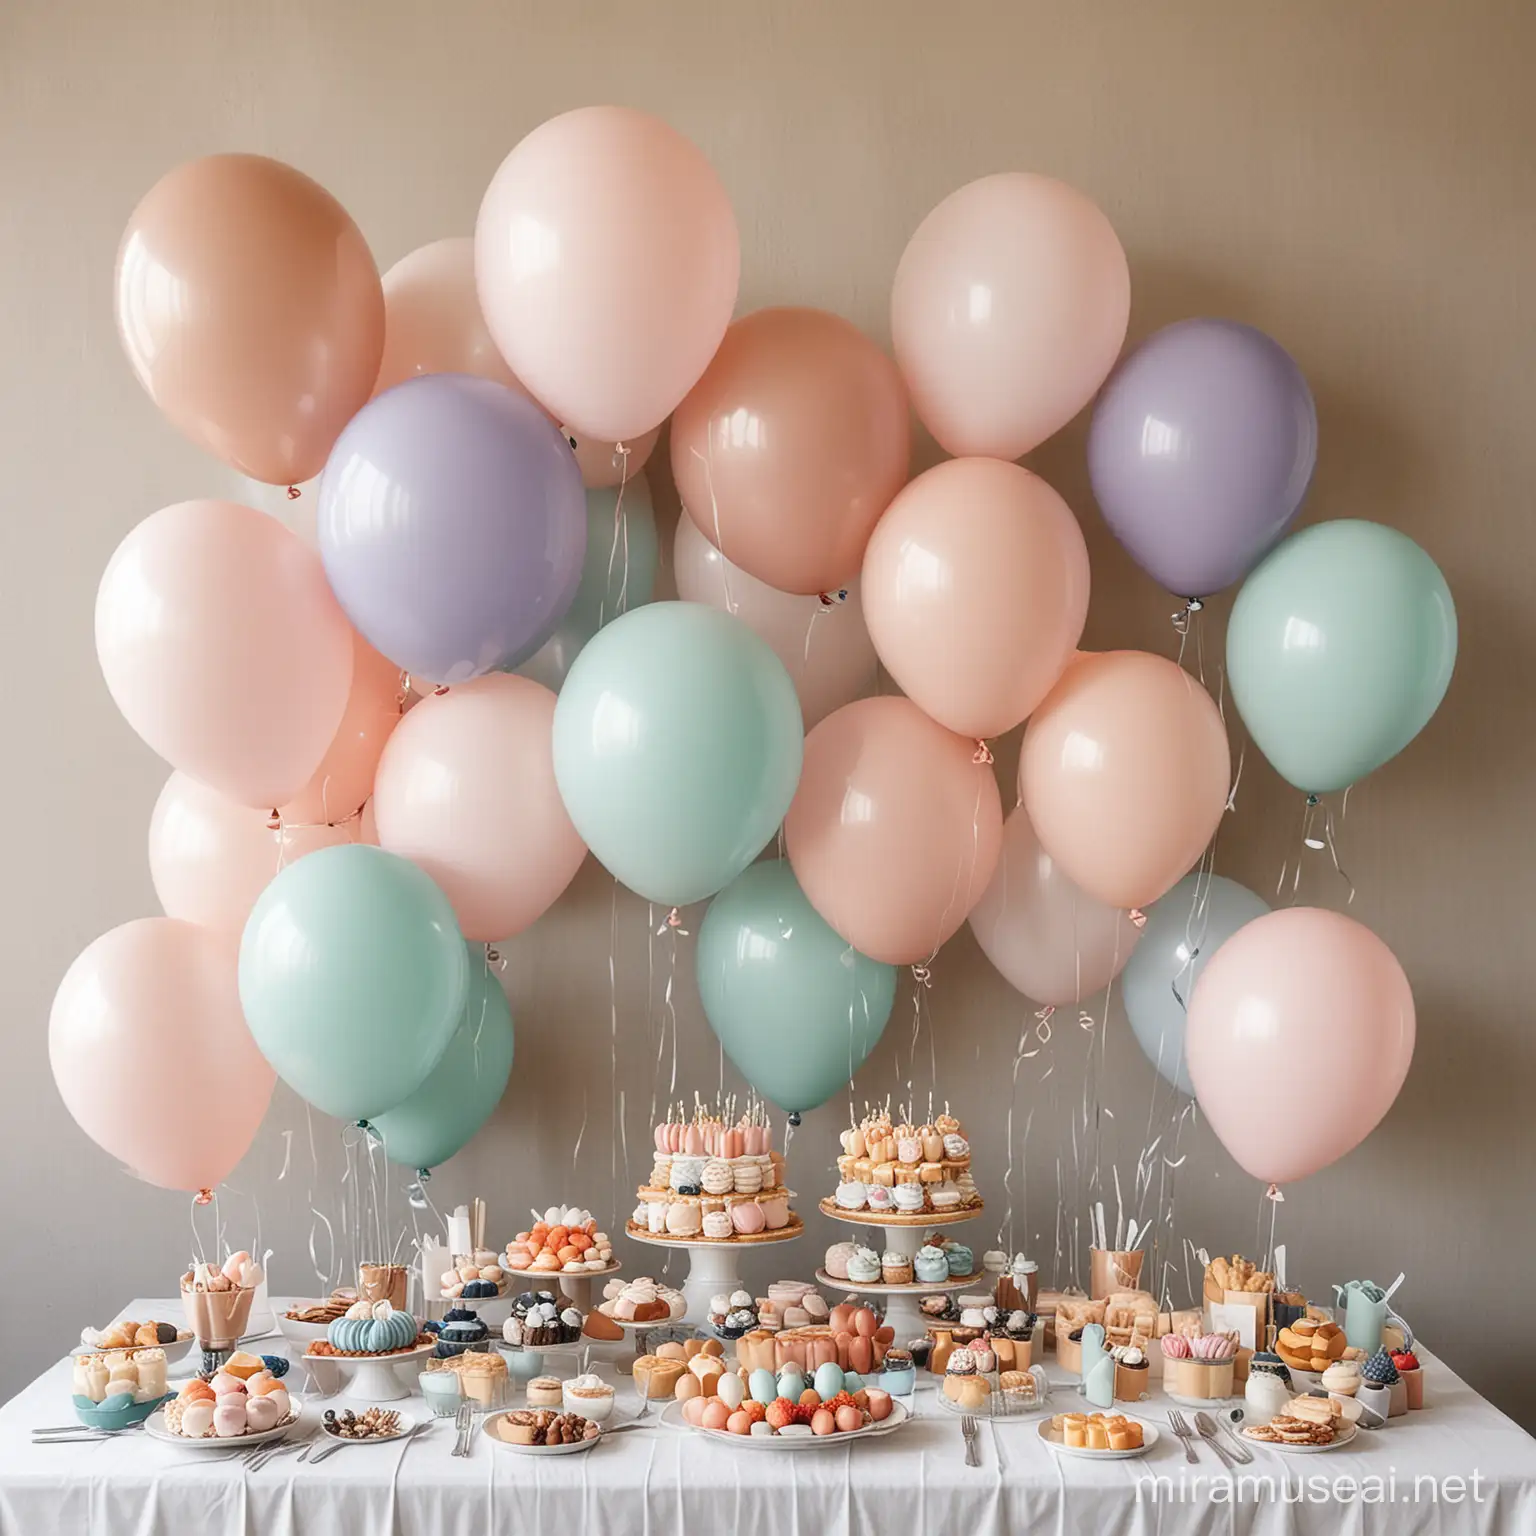 Balloon party，A comforting color palette